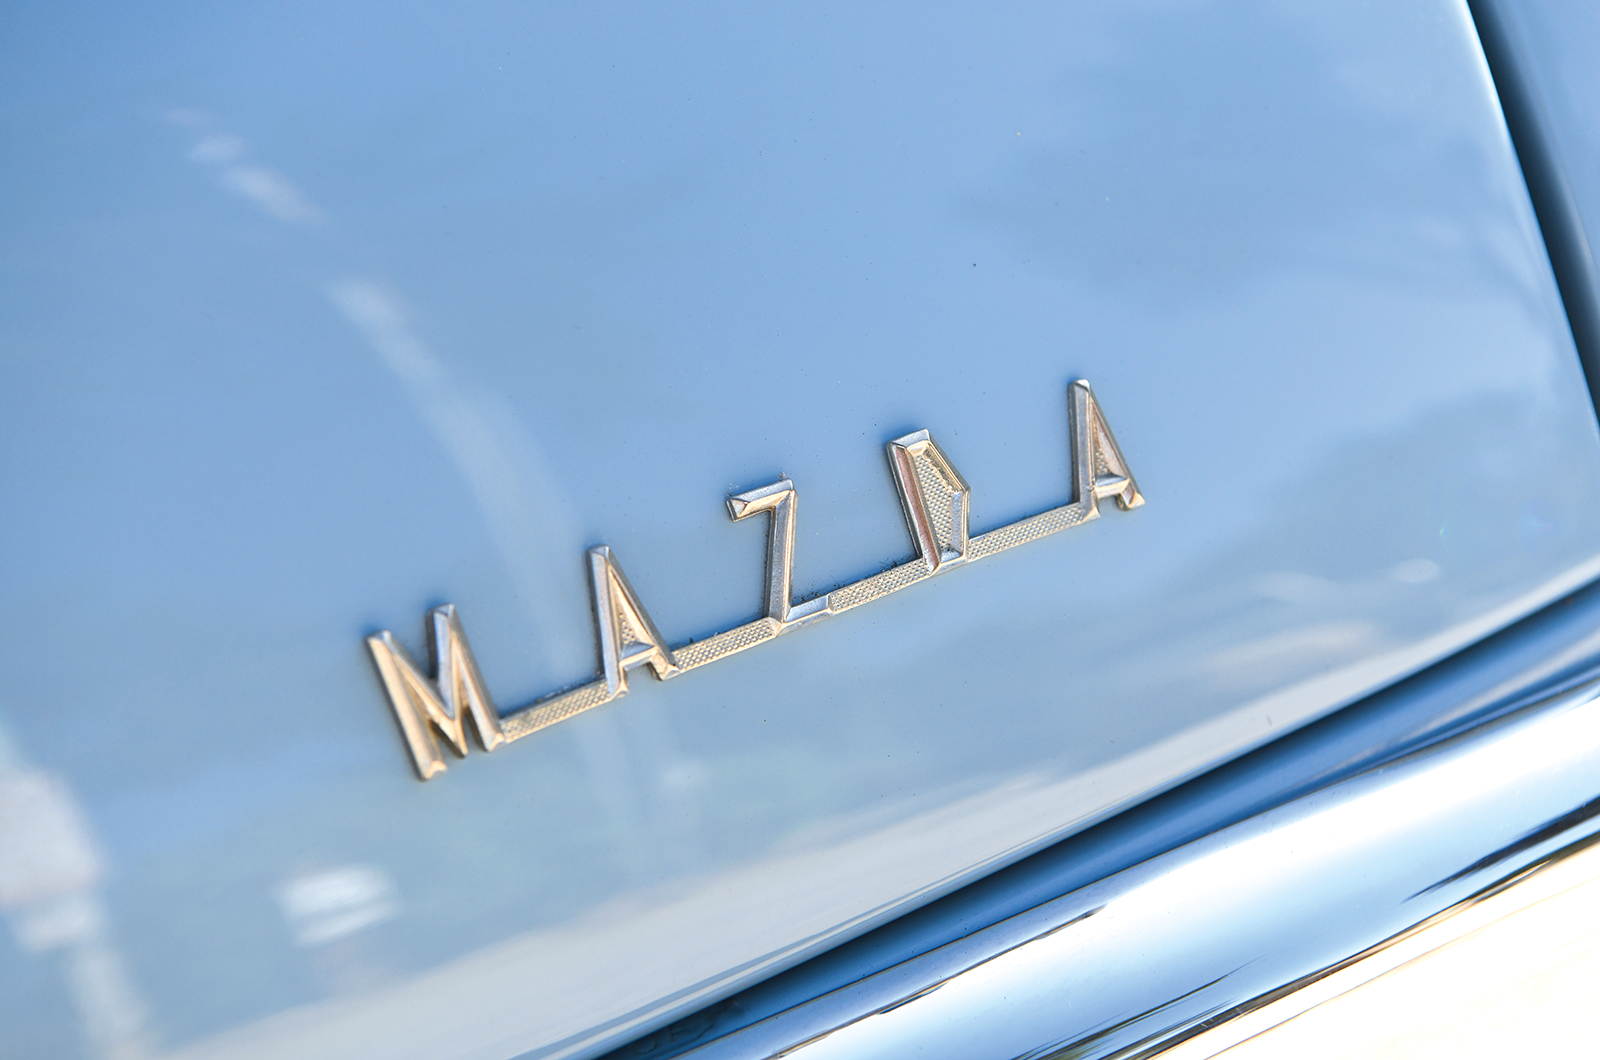 Classic & Sports Car – Mazda R360 Coupé: pint-sized perfection